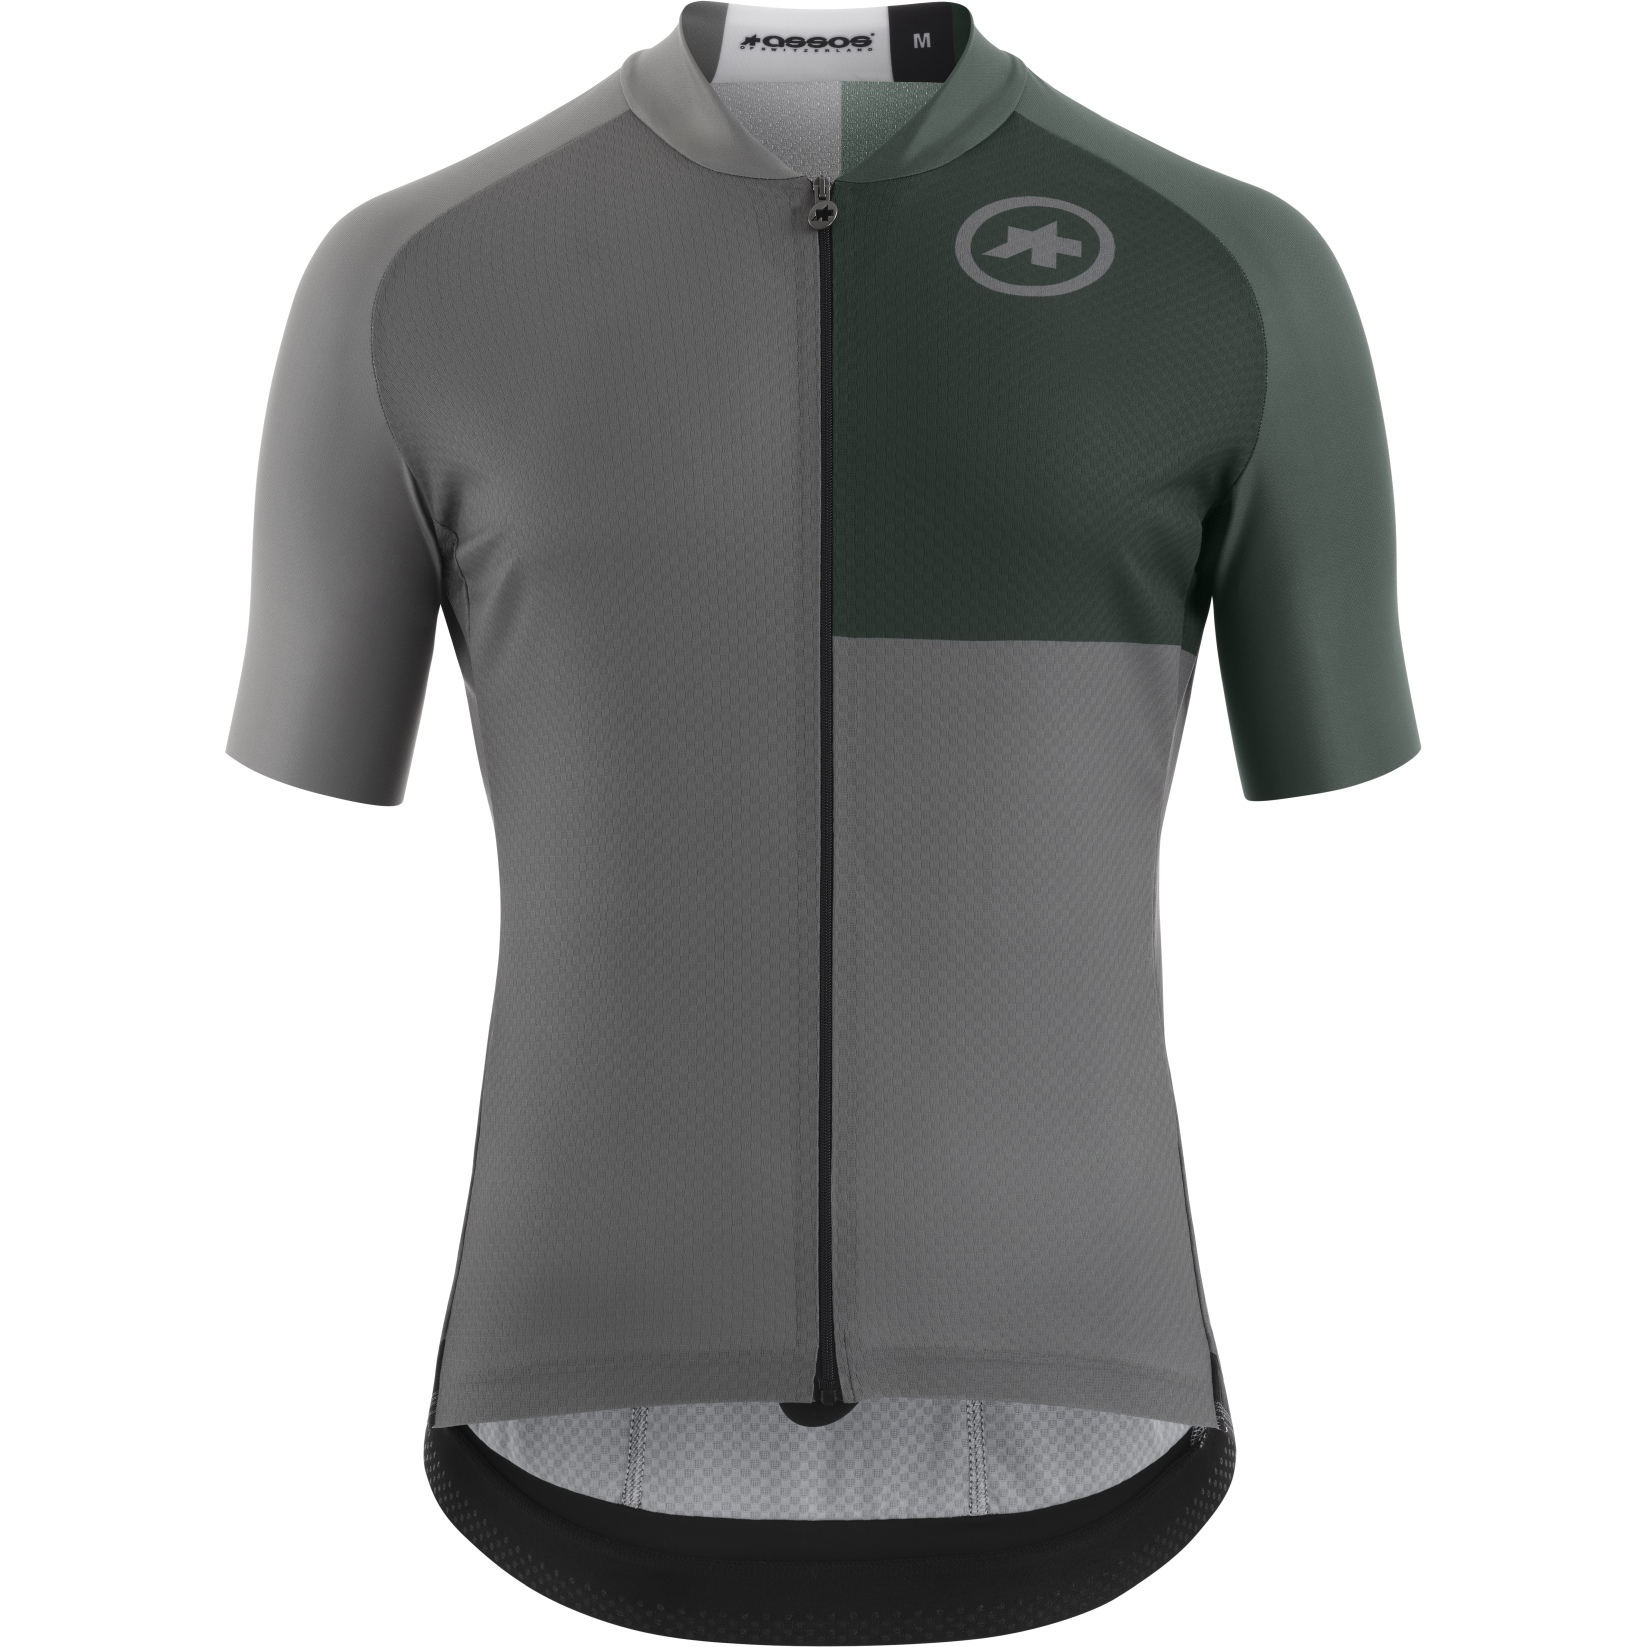 Picture of Assos MILLE GT Short Sleeve Jersey C2 EVO Stahlstern - grenade green